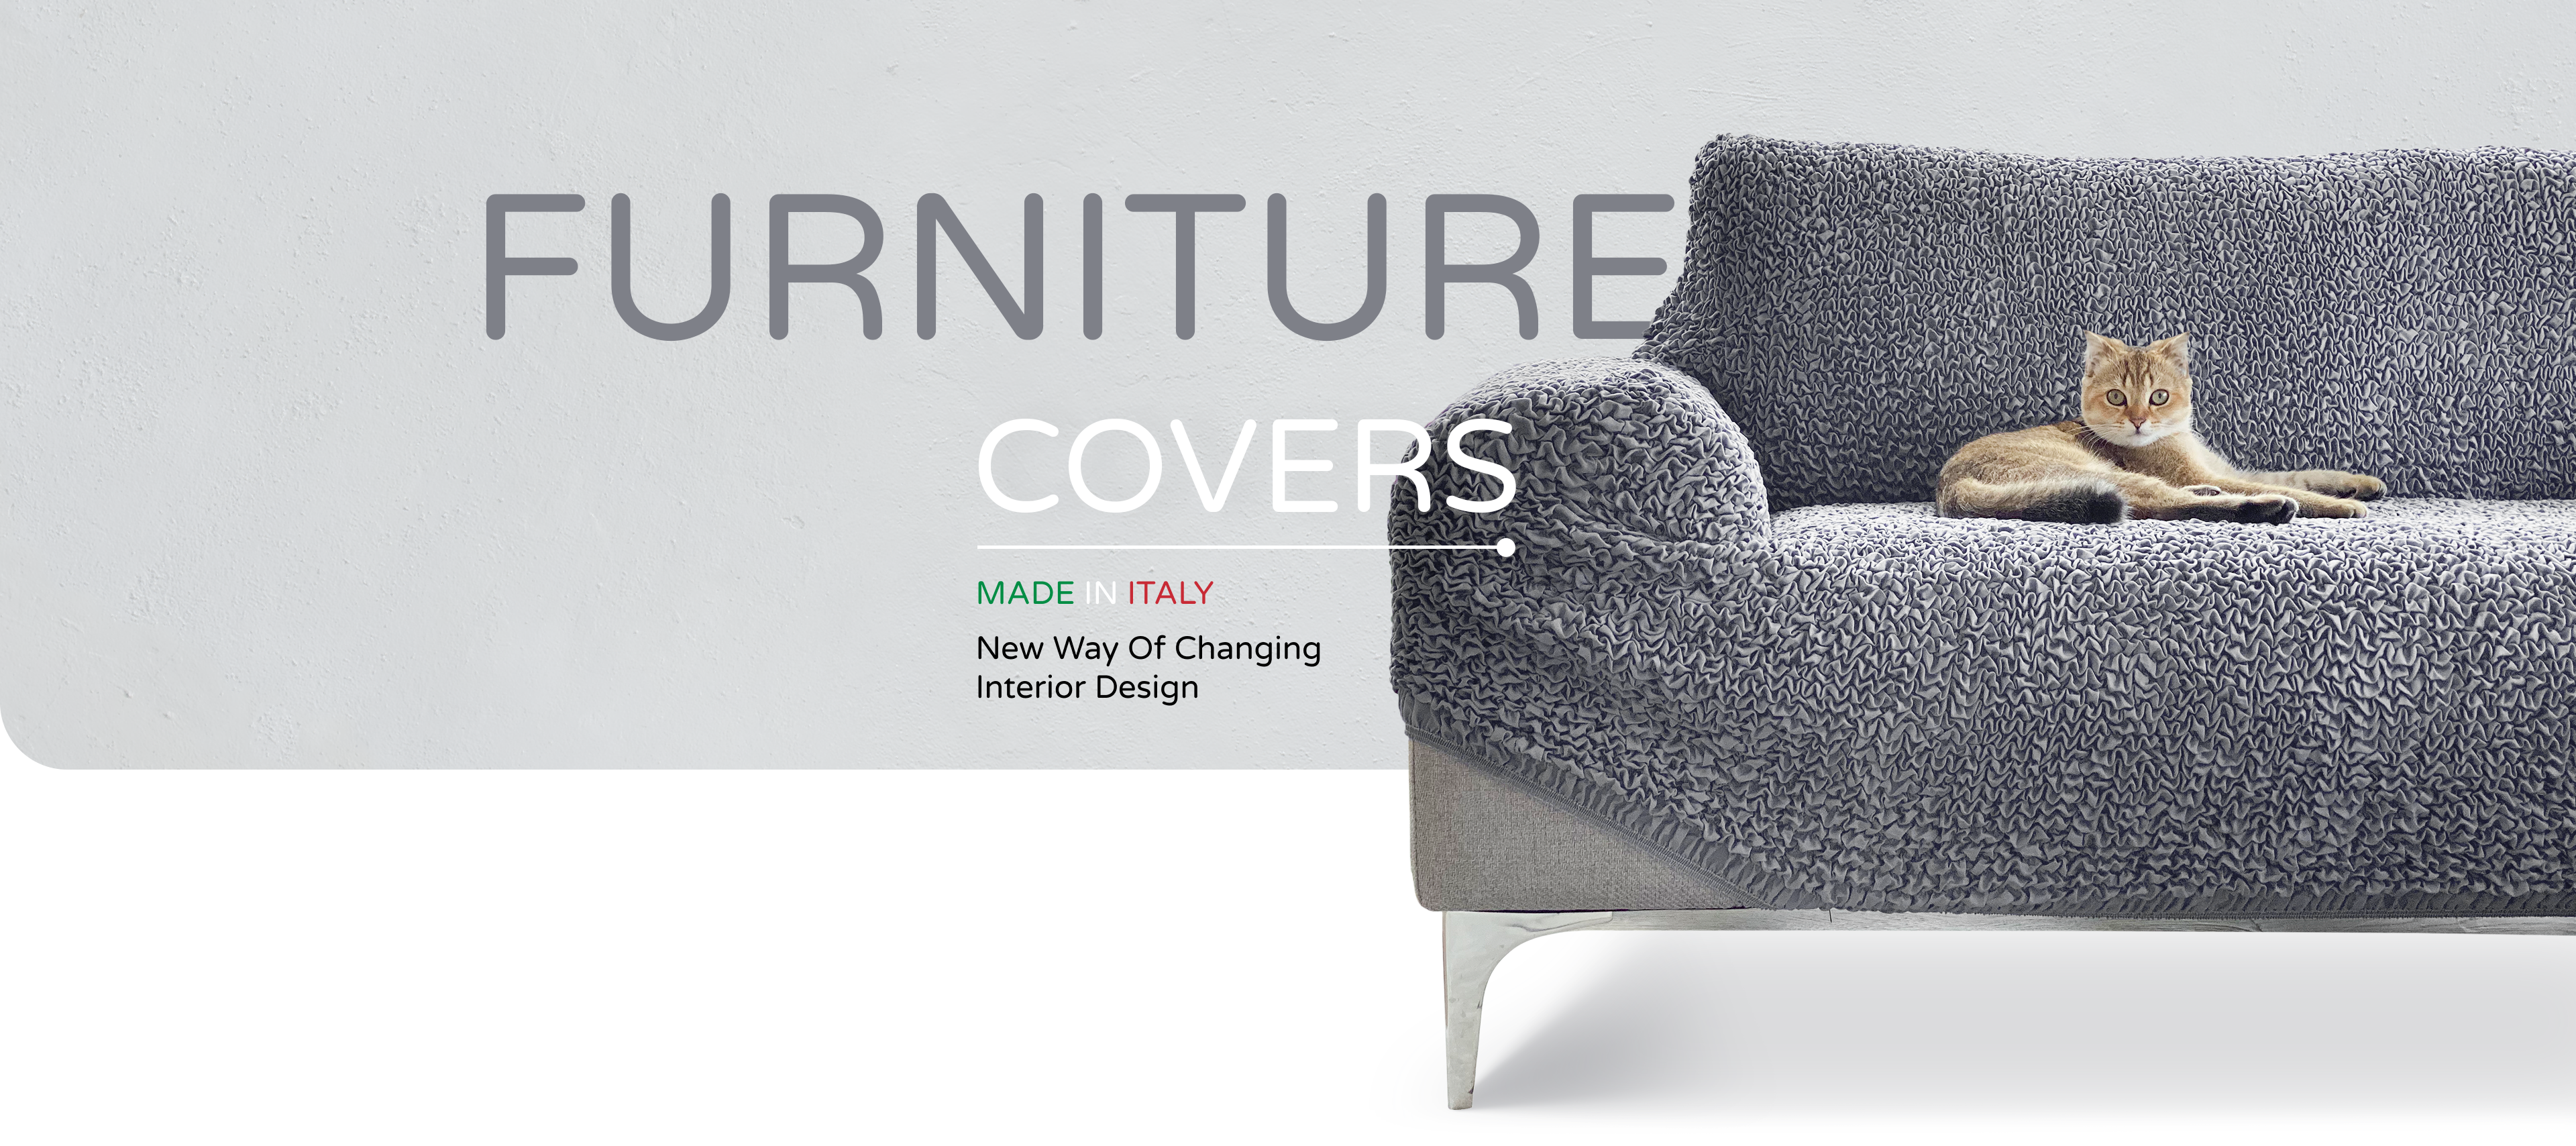 Furniture Covers - New Way of Changing Interior Design